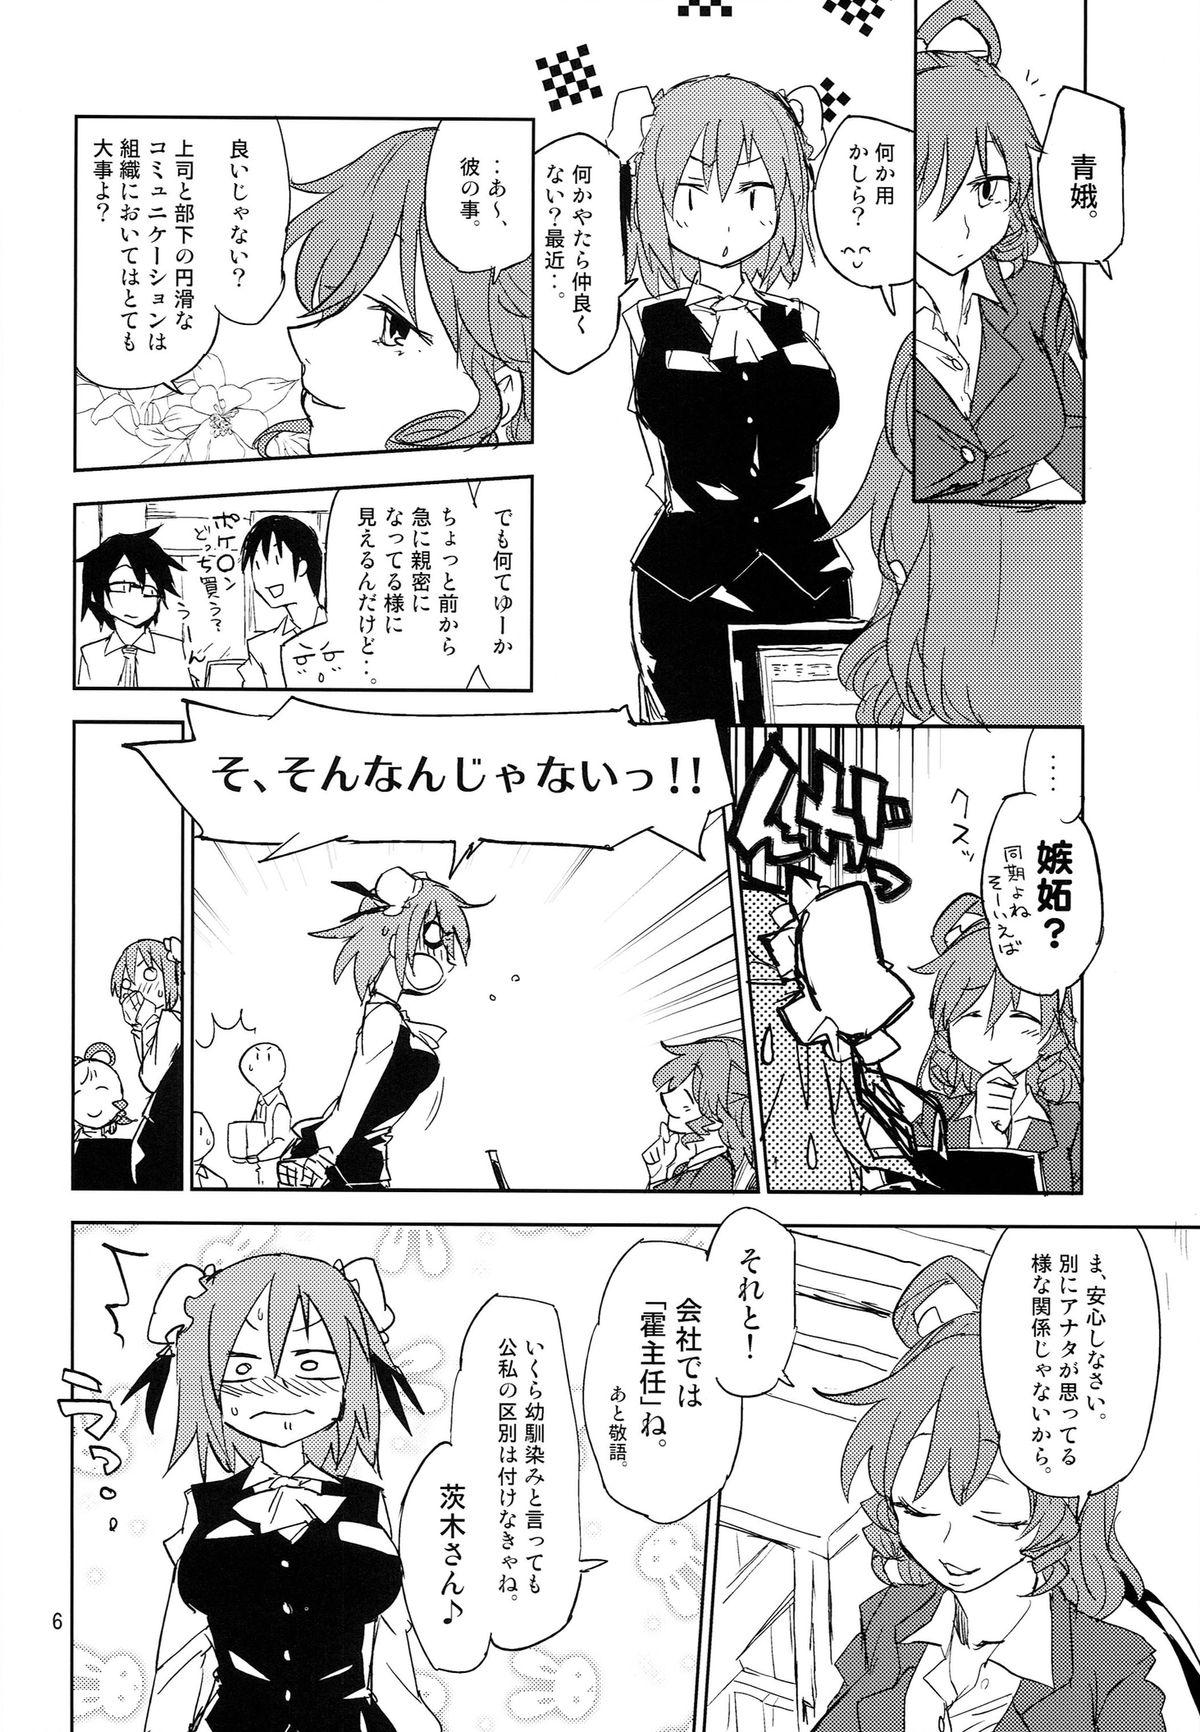 Booty STRICTLY BUSINESS!! Extra - Touhou project Scandal - Page 6